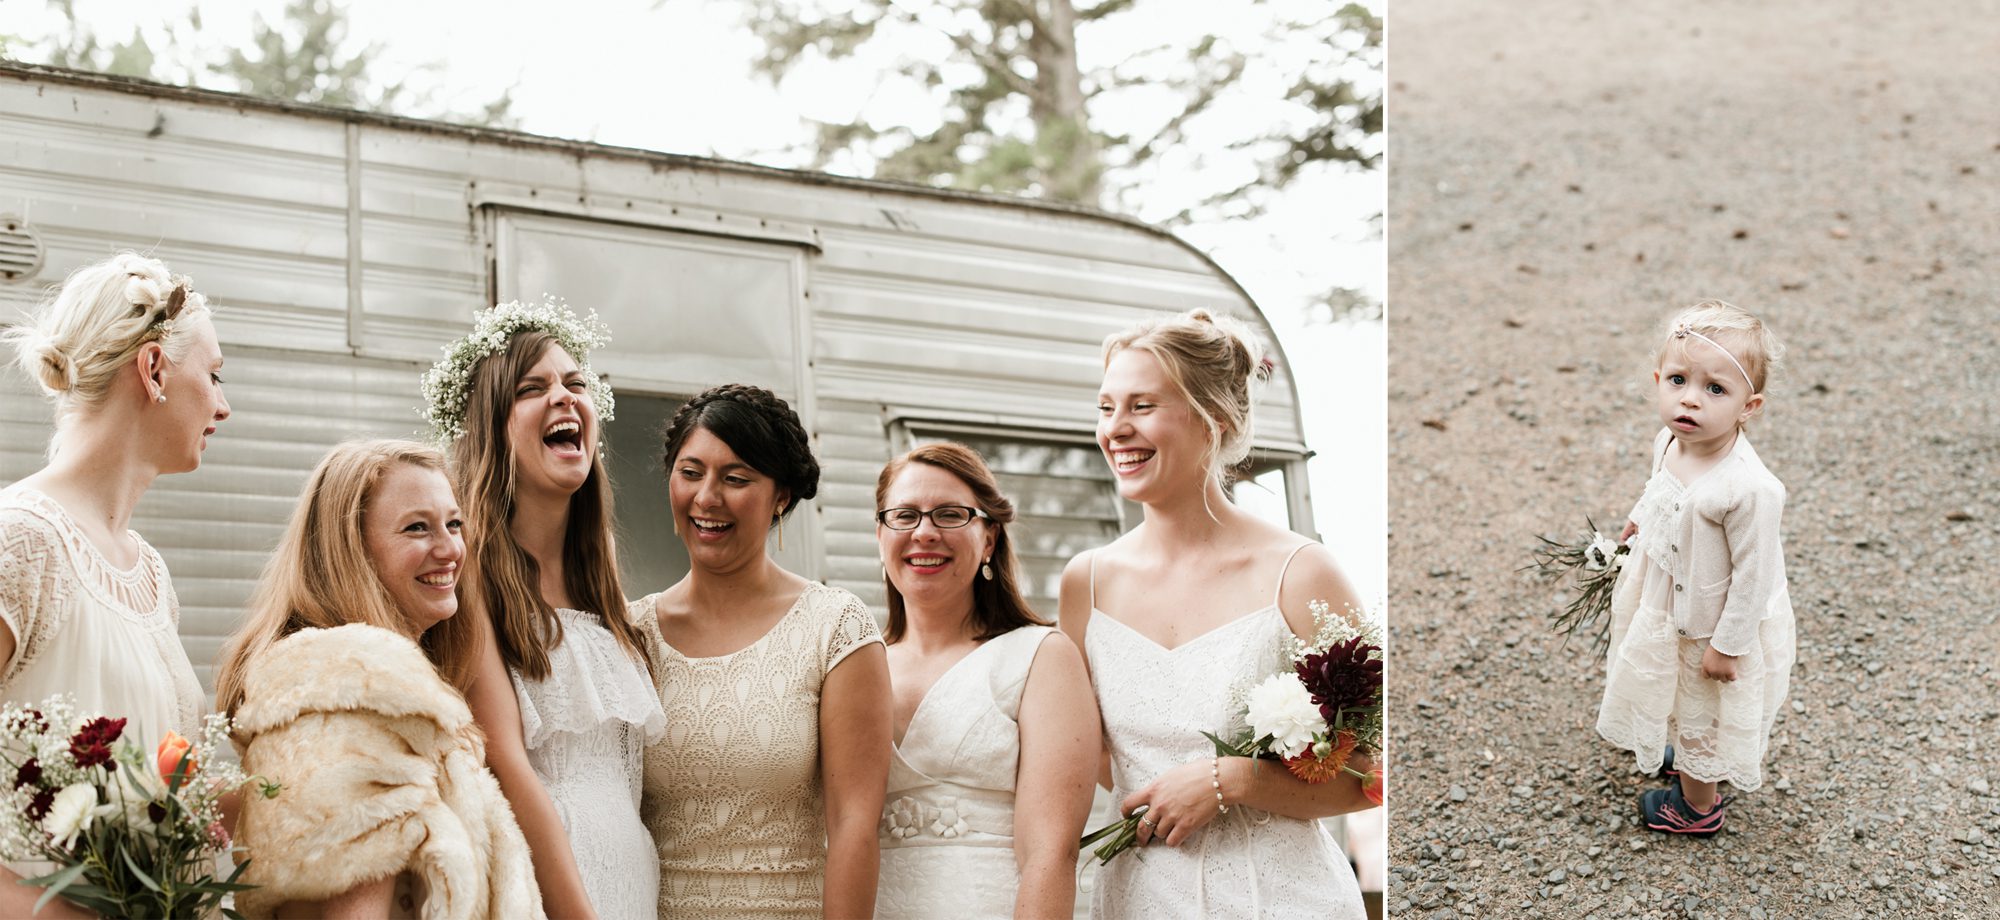 The bridesmaids have a great time during portraits. By Long Beach, Washington wedding photographer Briana Morrison